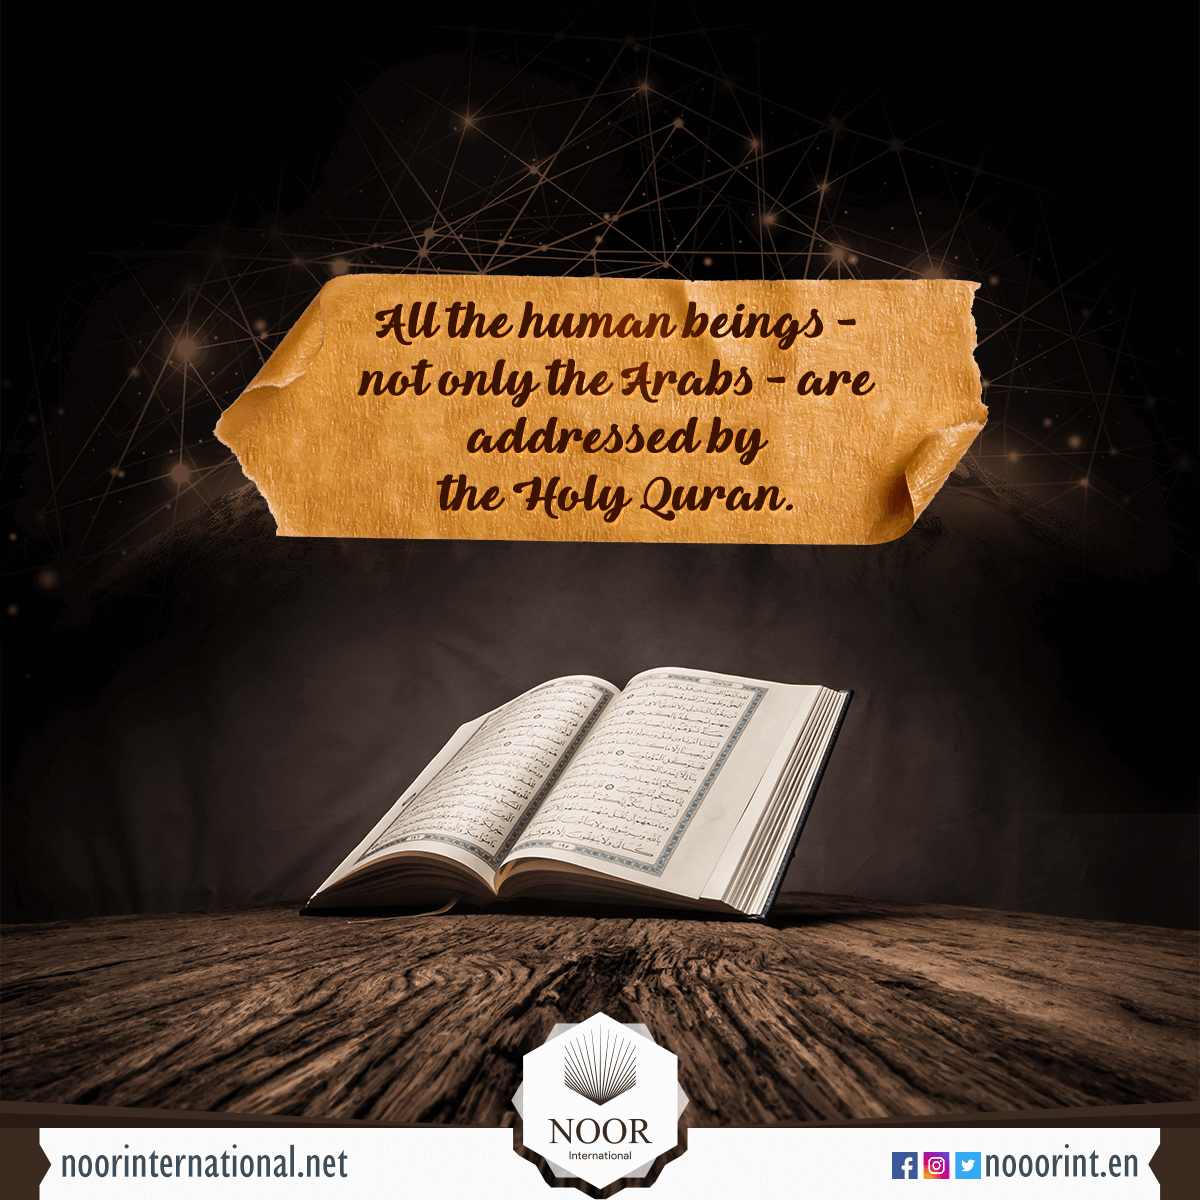 All the human beings - not only the Arabs - are addressed by the Holy Quran.